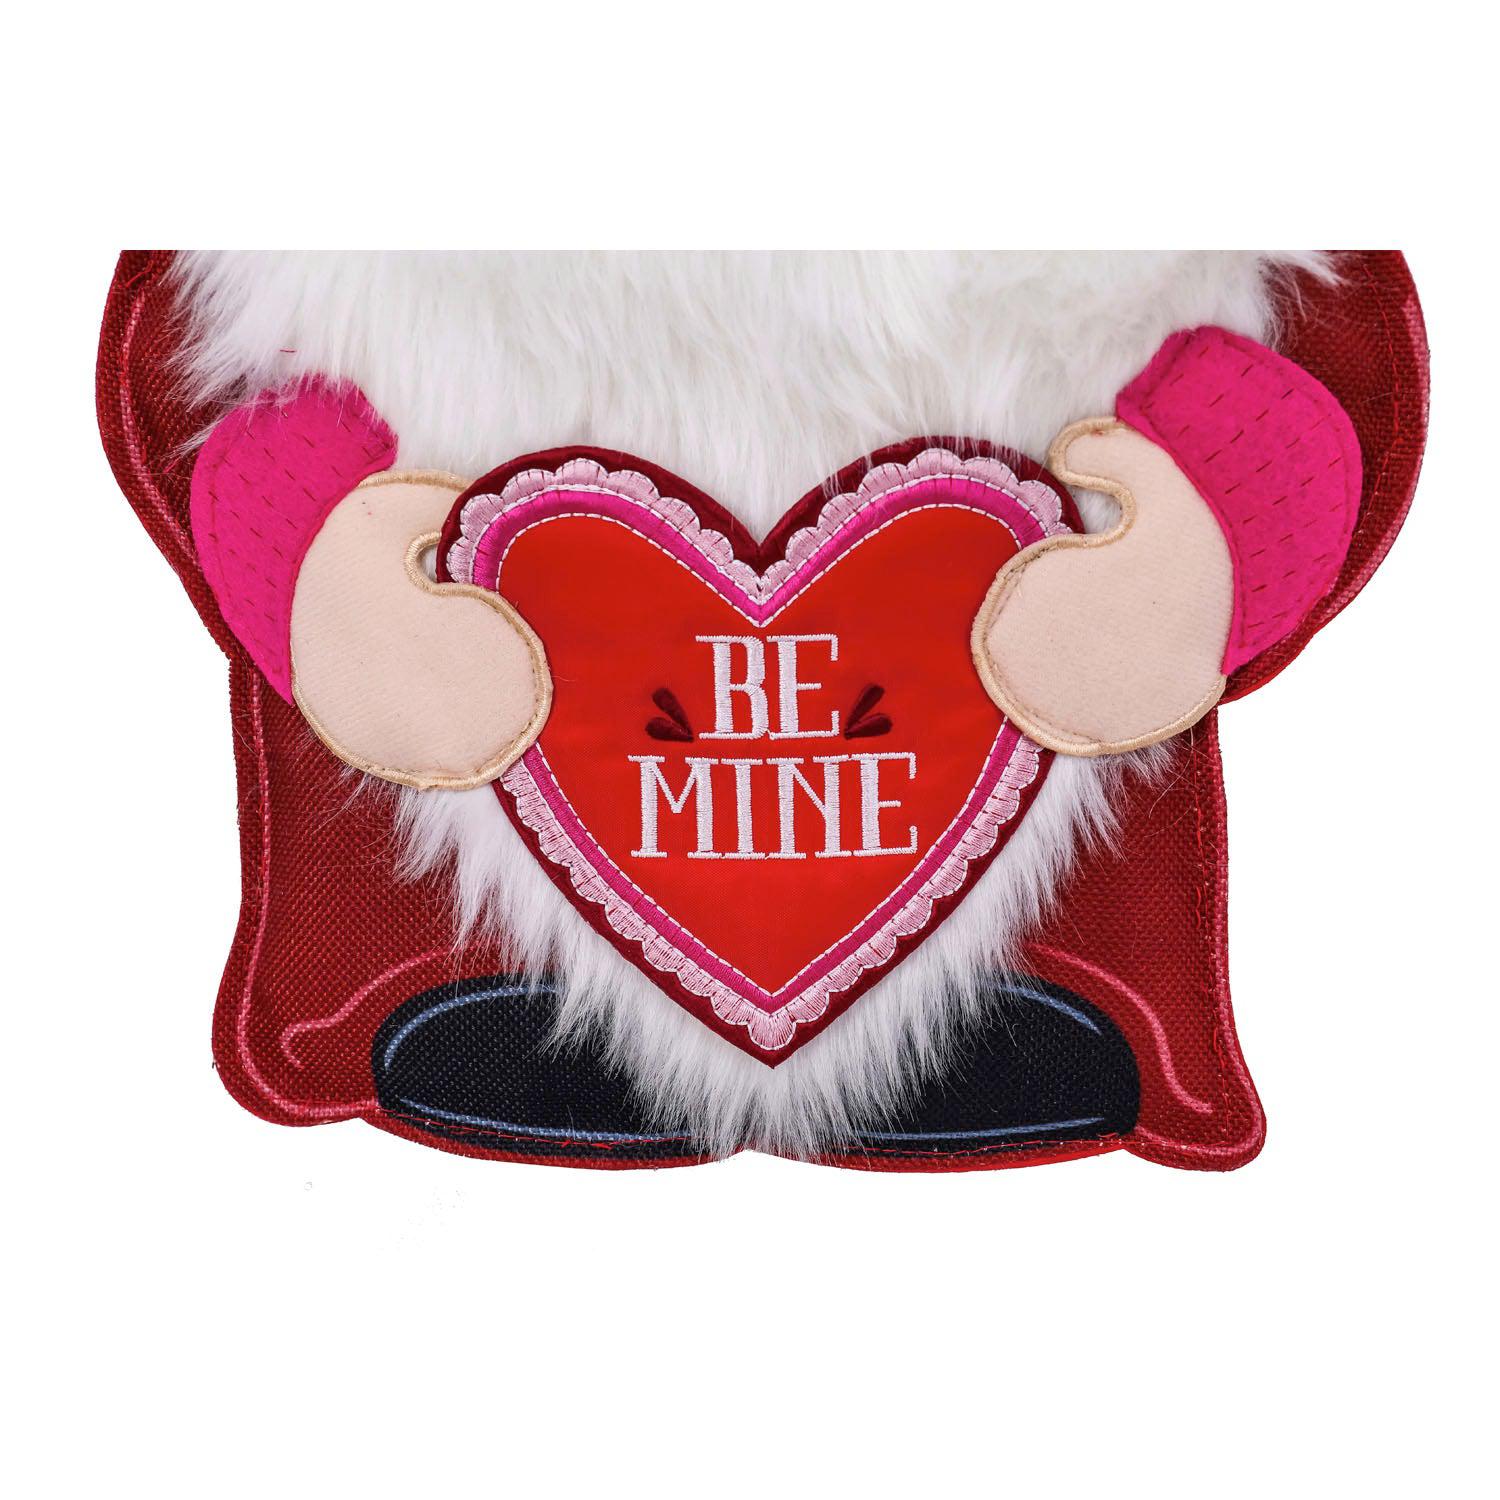 The Valentine Gnome Door Décor features a gnome dressed in red holding a heart with the words "Be Mine". 